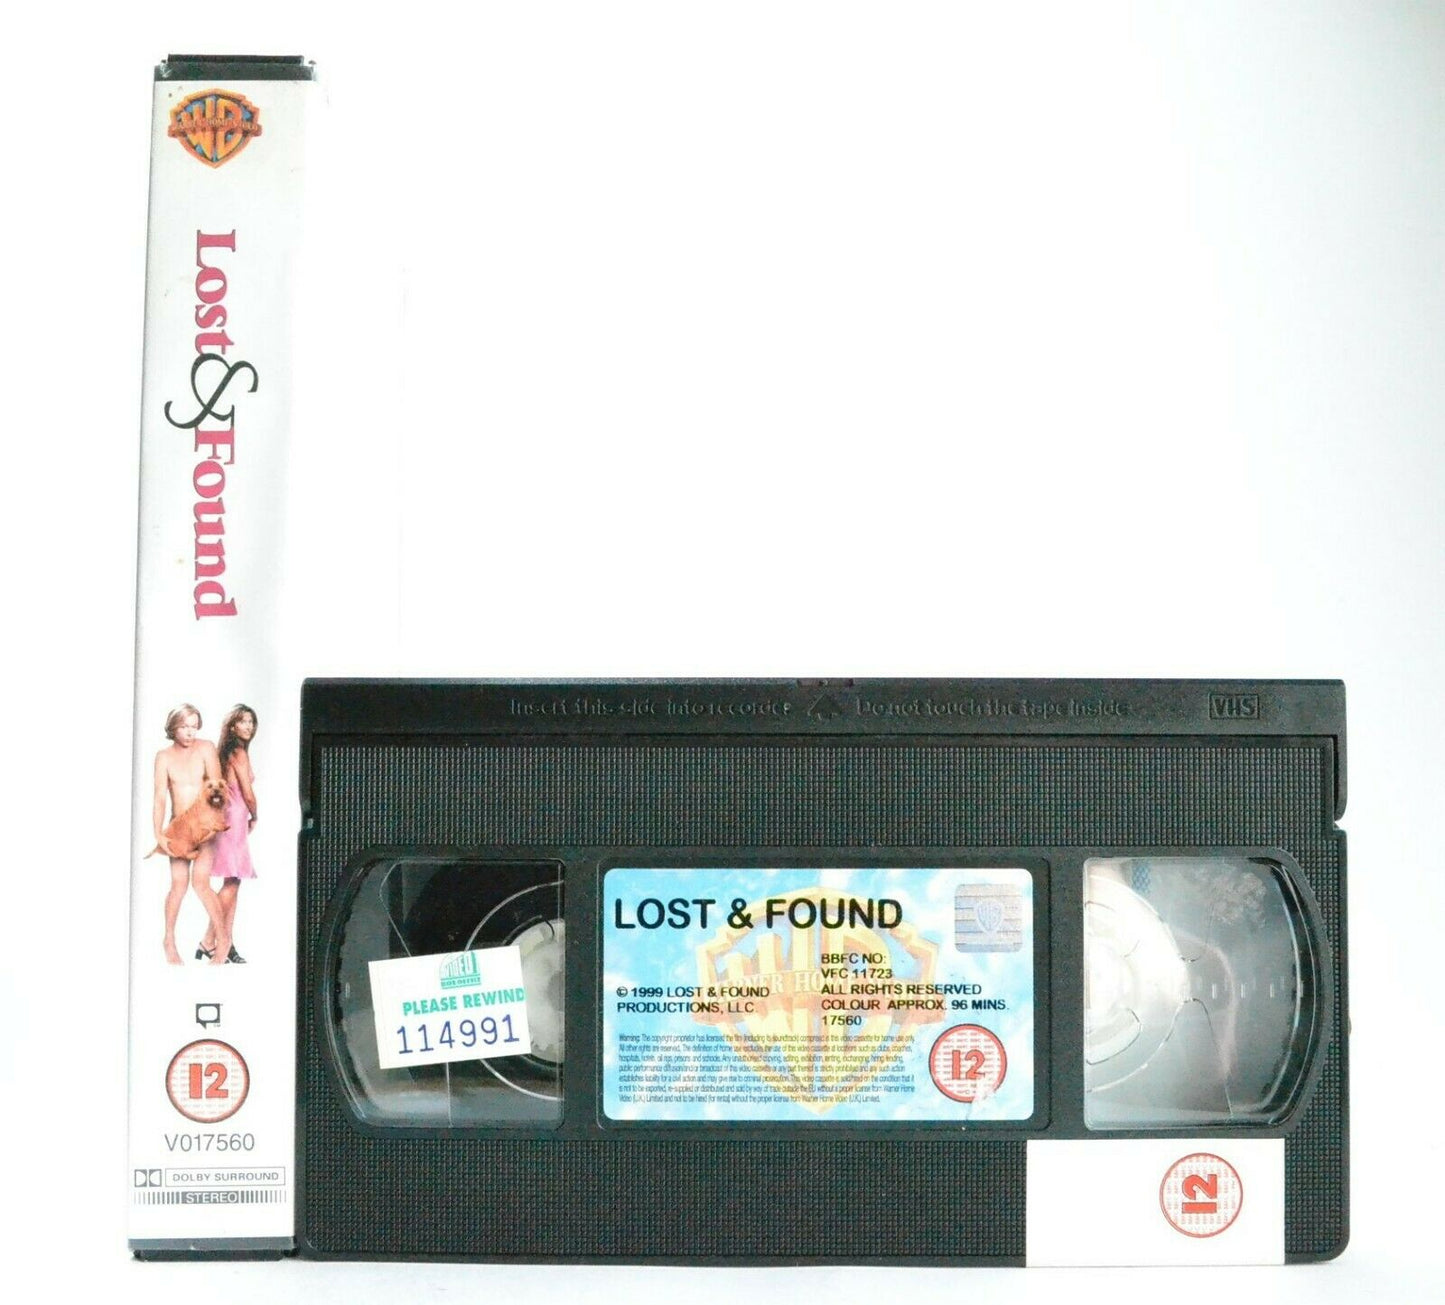 Lost And Found: Romantic Comedy (1999) - Large Box - D.Spade/S.Marceau - Pal VHS-